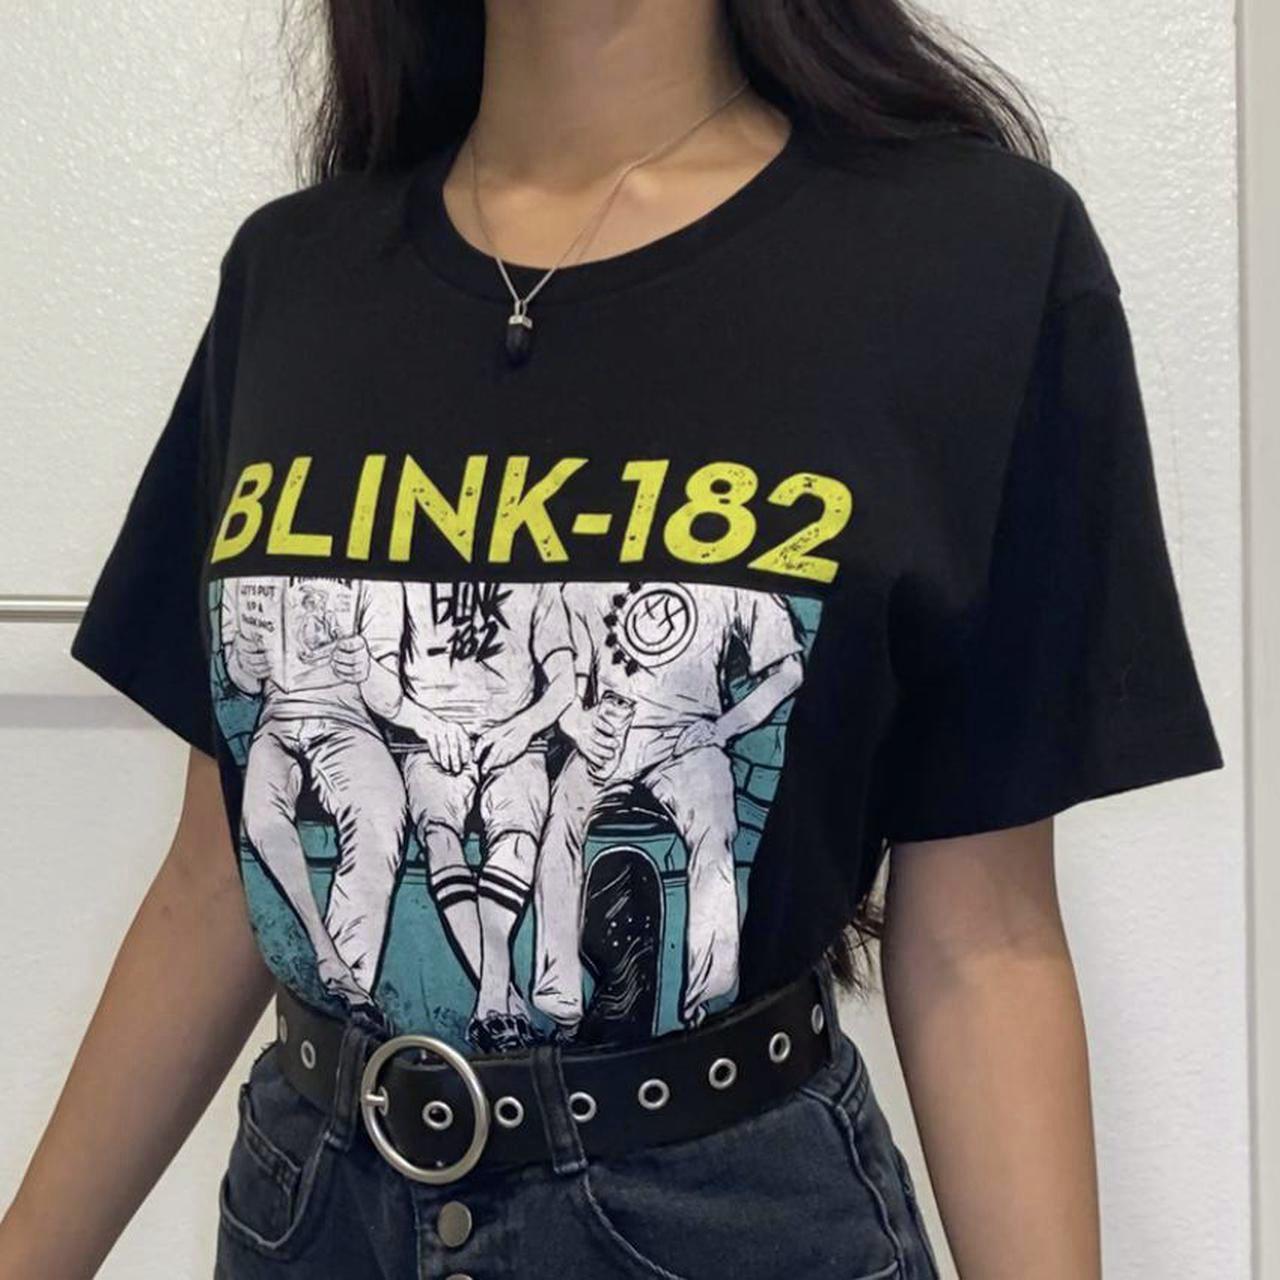 Product Image 1 - ☆ BLINK-182 BAND TEE ☆

♡